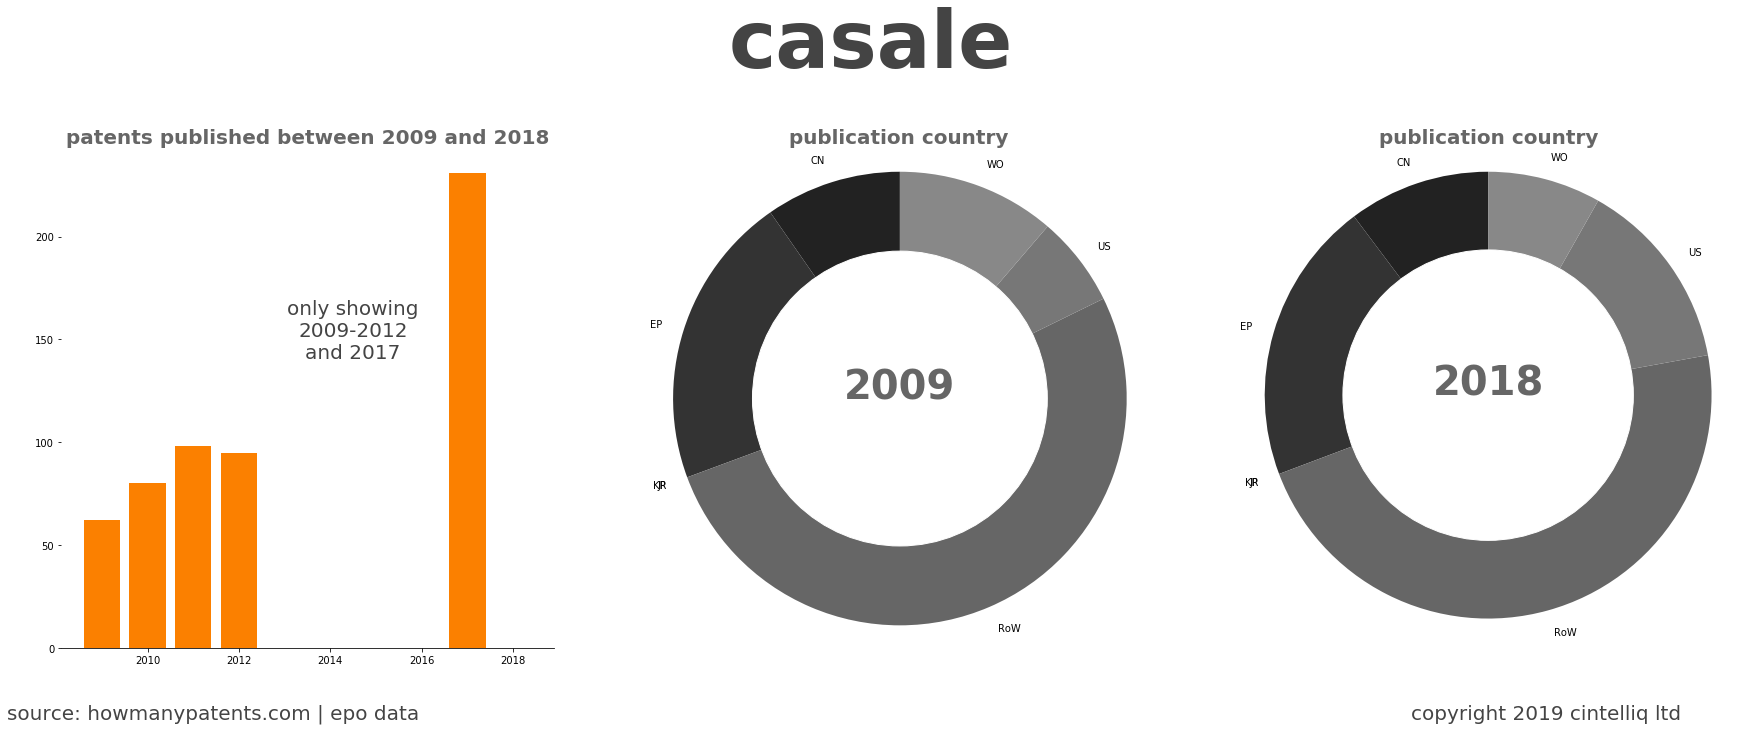 summary of patents for Casale